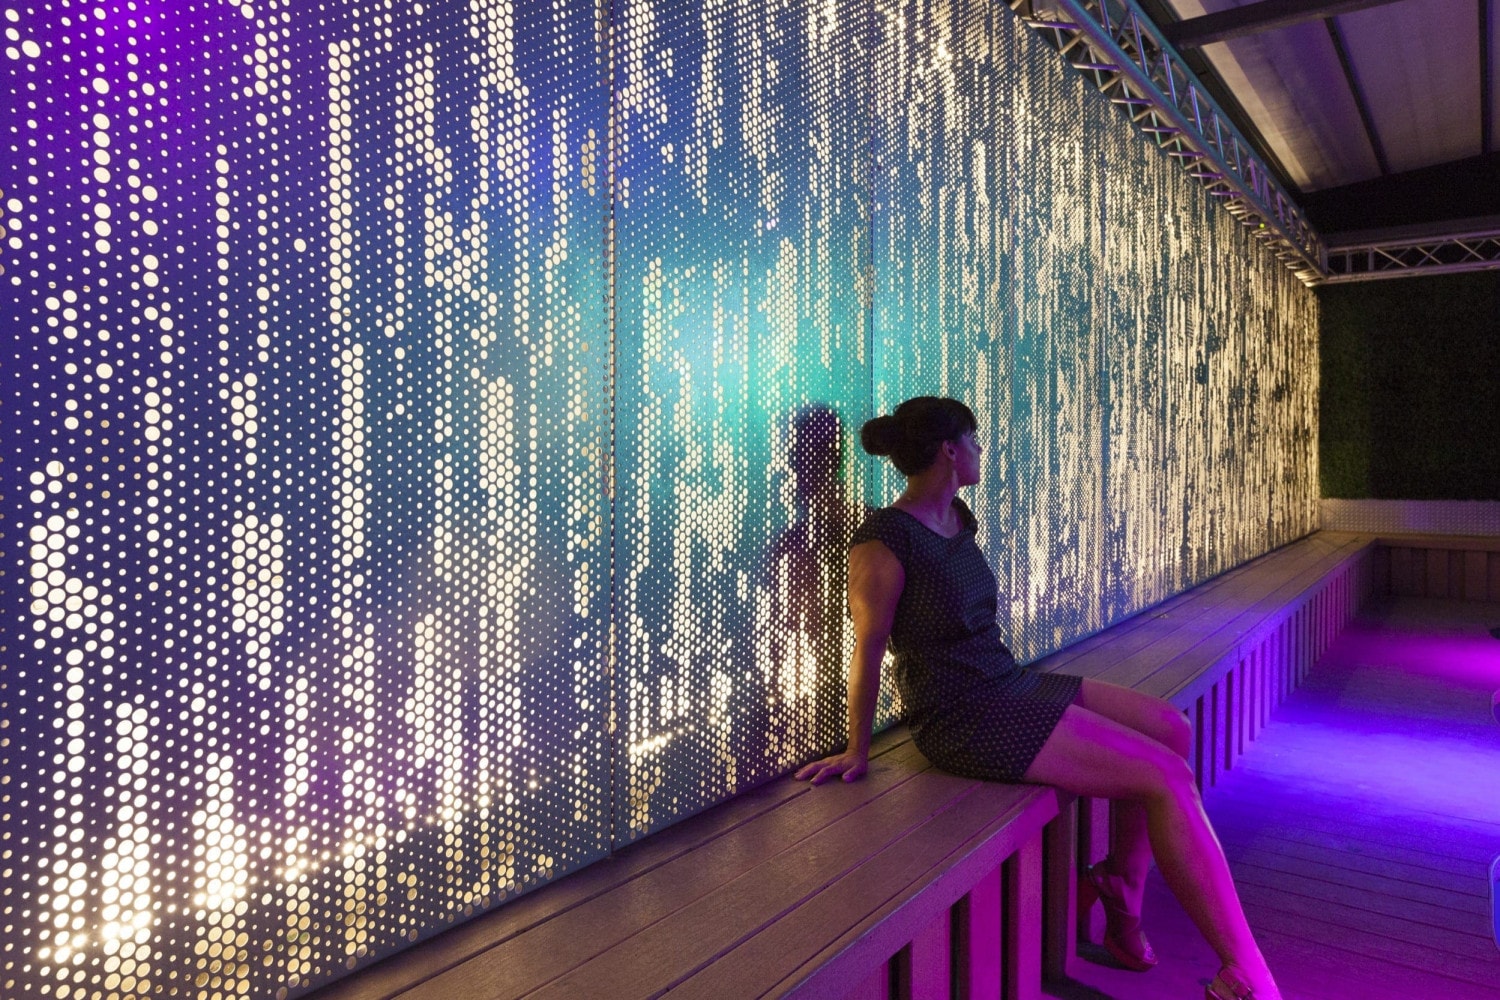 An illuminated ImageWall screen provides a dramatic backdrop for an event space